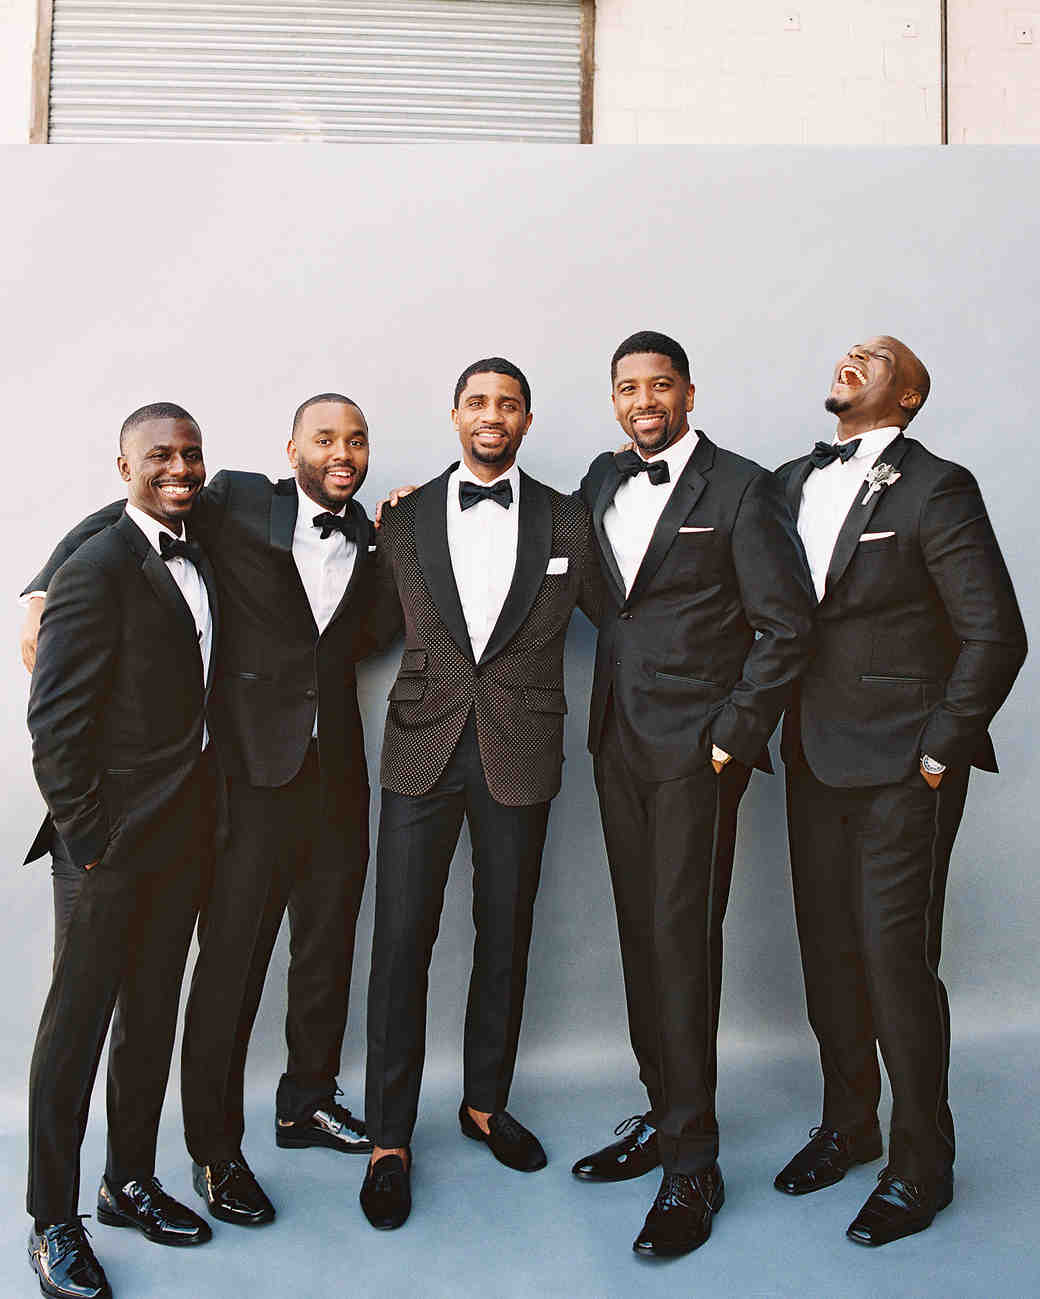 Choosing your best man and groomsmen - men dressed in tuxedo -Wedding Soiree Blog by K’Mich, Philadelphia’s premier resource for wedding planning and inspiration